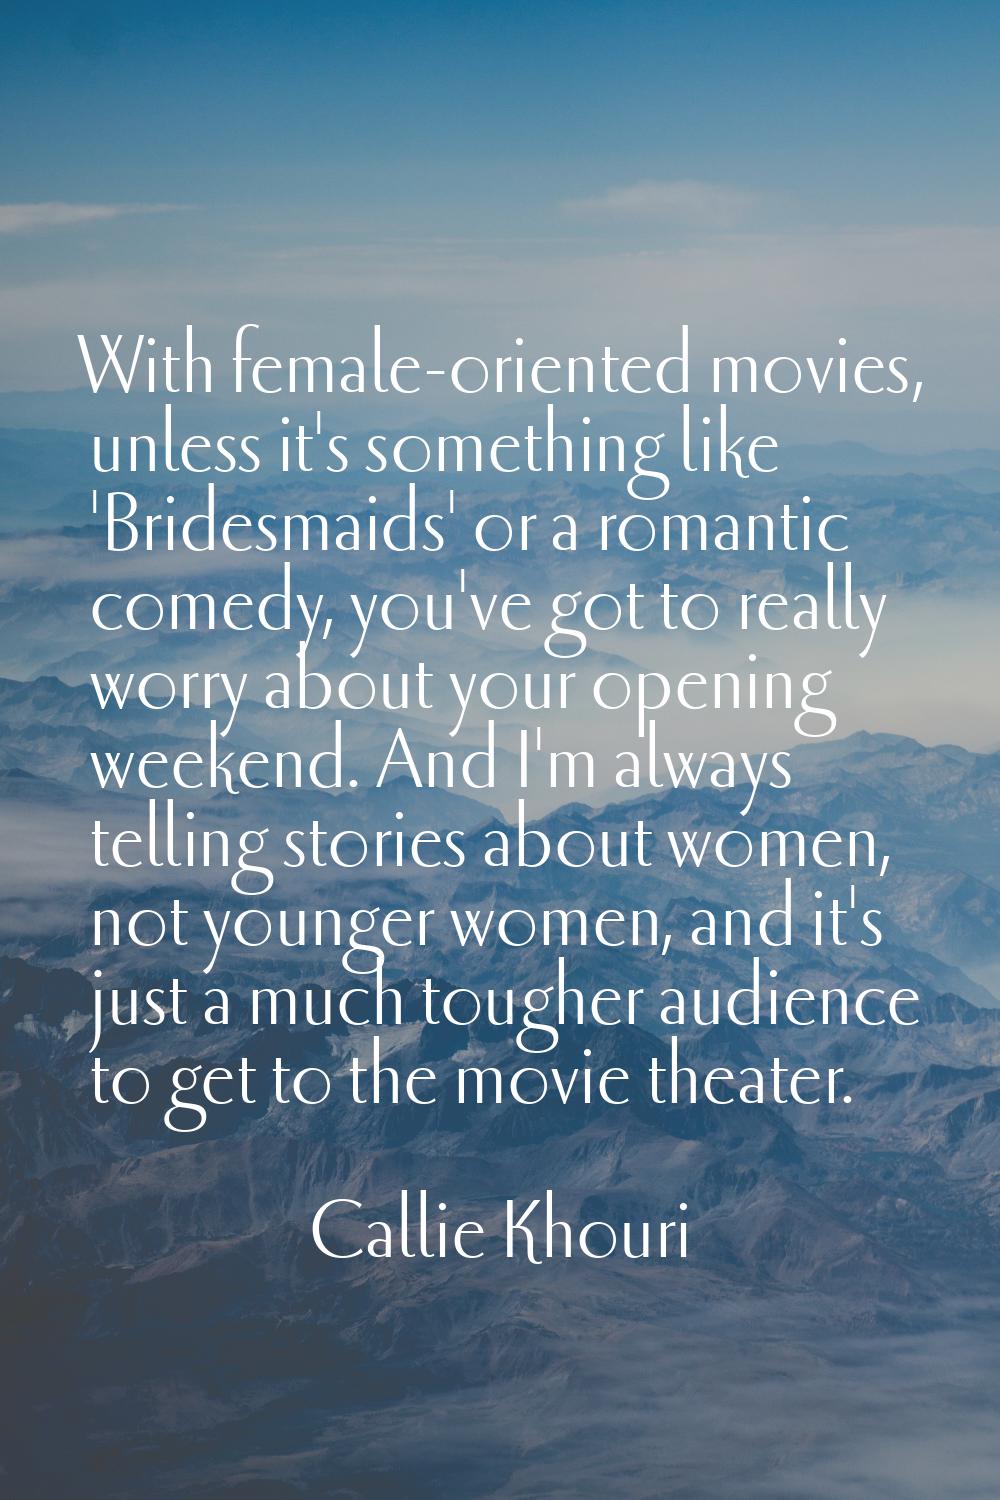 With female-oriented movies, unless it's something like 'Bridesmaids' or a romantic comedy, you've 